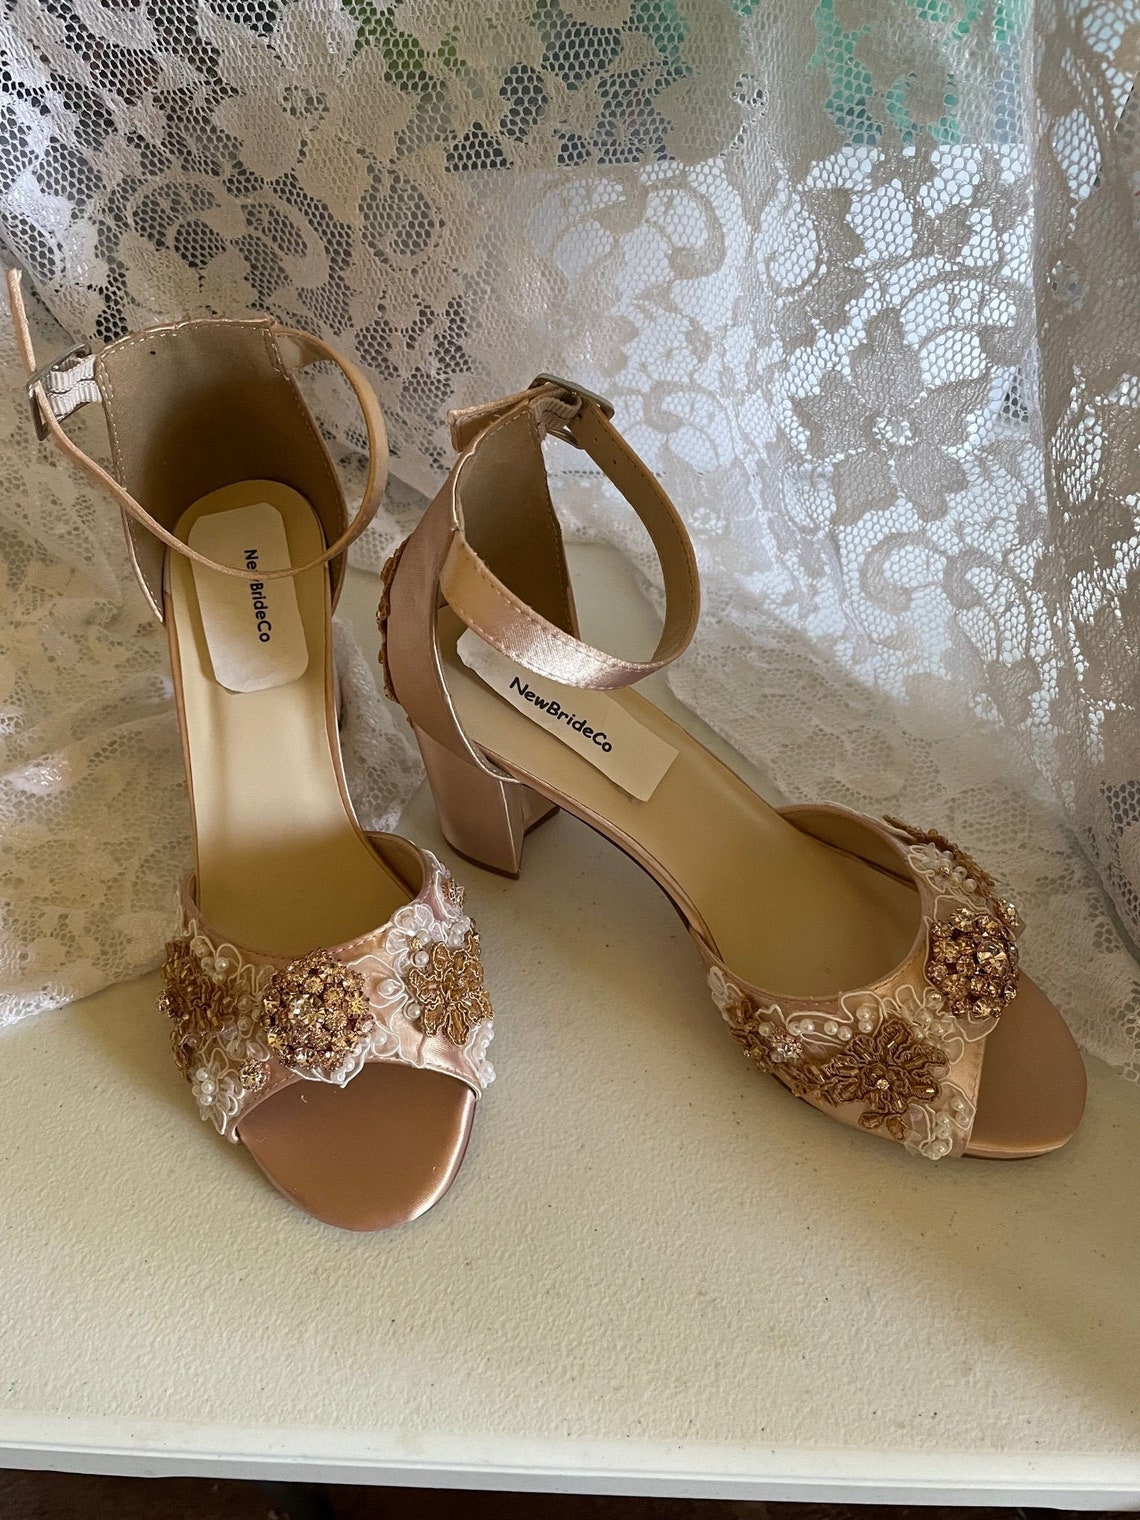 Rose Gold Shoes 2 1/2 thick heels trimmed with lots of | Etsy